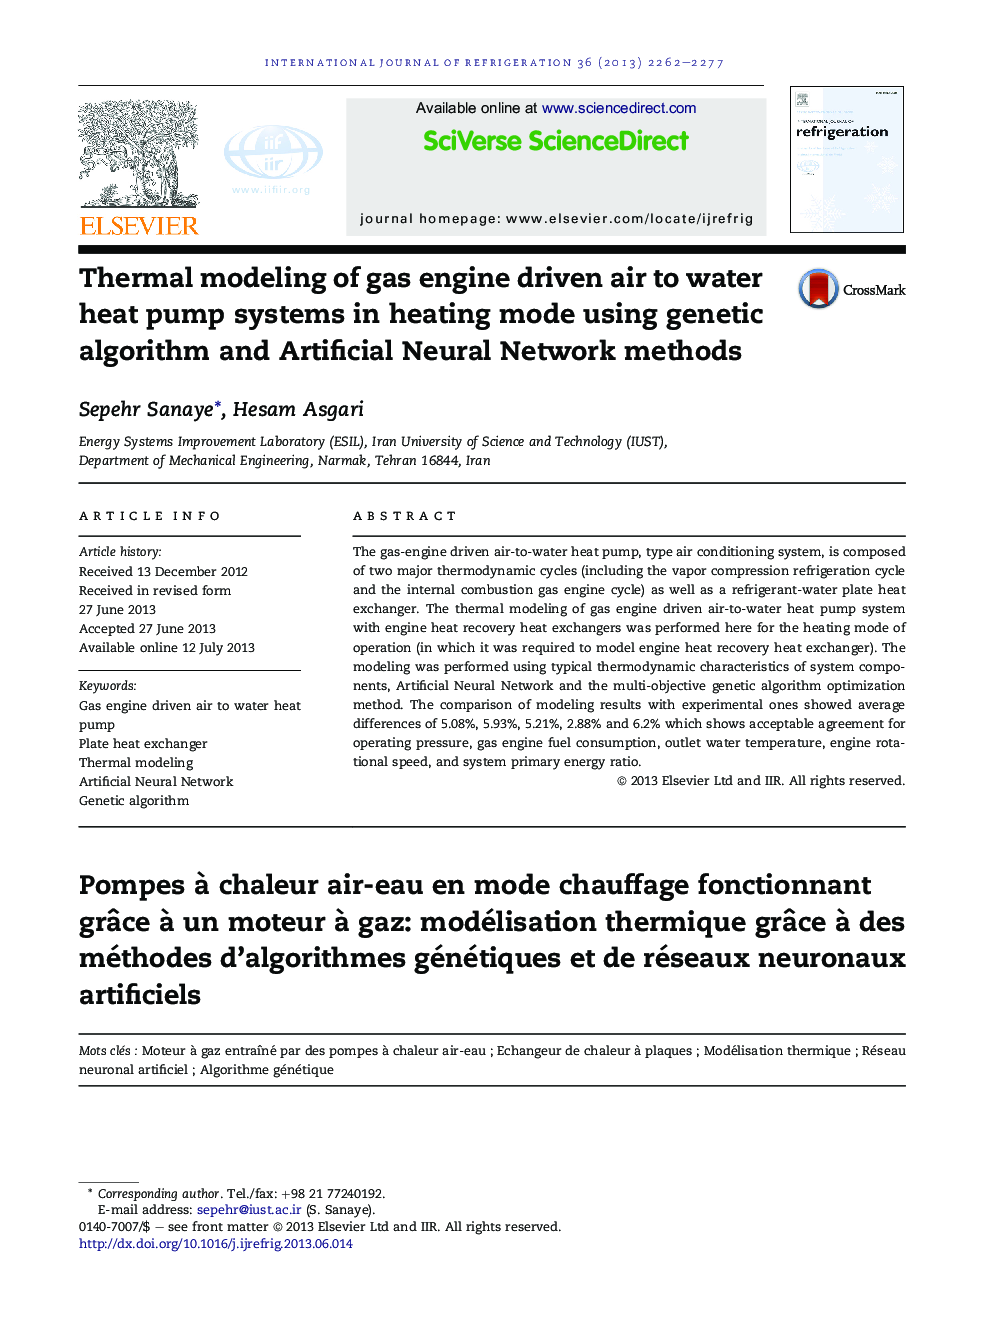 Thermal modeling of gas engine driven air to water heat pump systems in heating mode using genetic algorithm and Artificial Neural Network methods